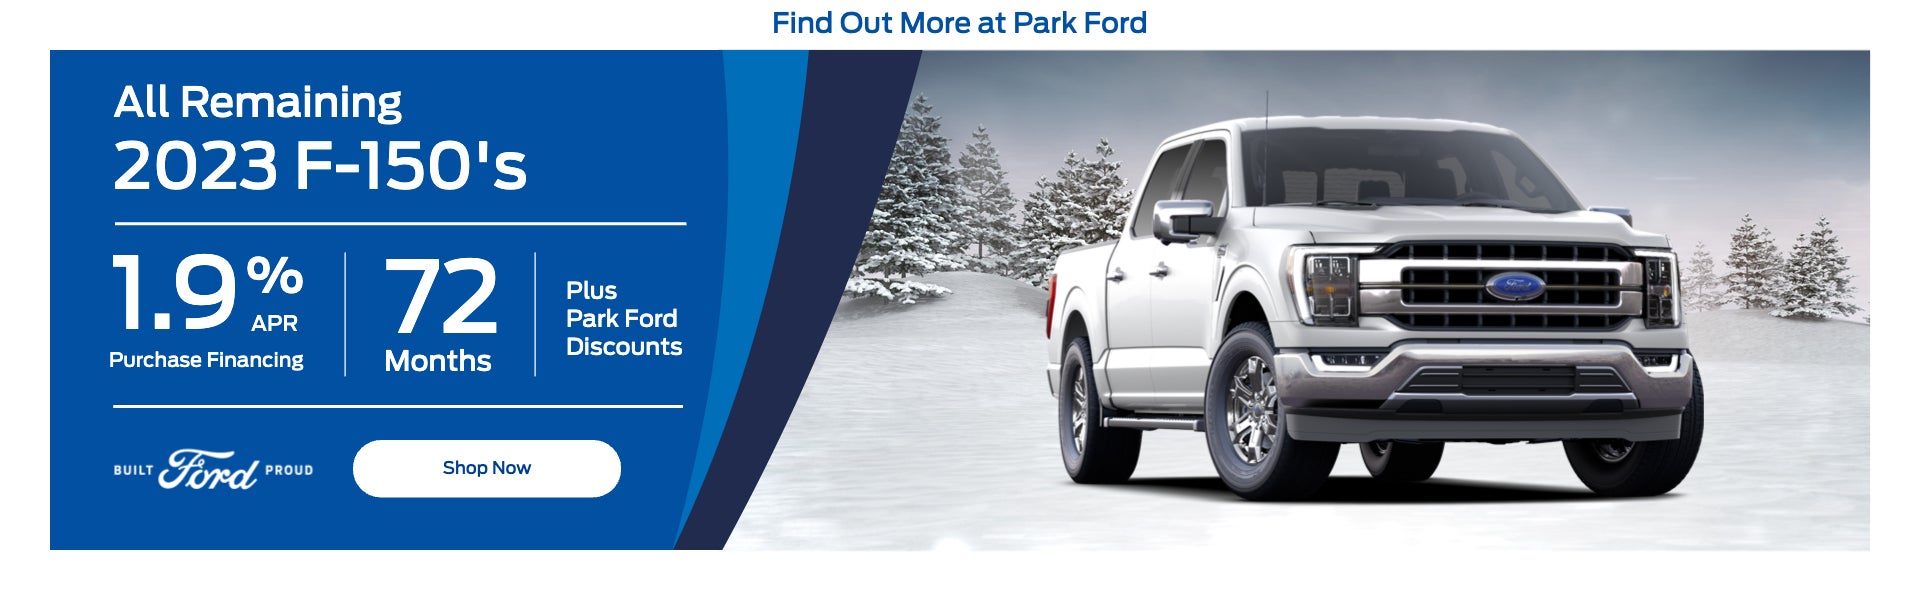 All Remaining 2023 F-150's: 1.9% Financing for 